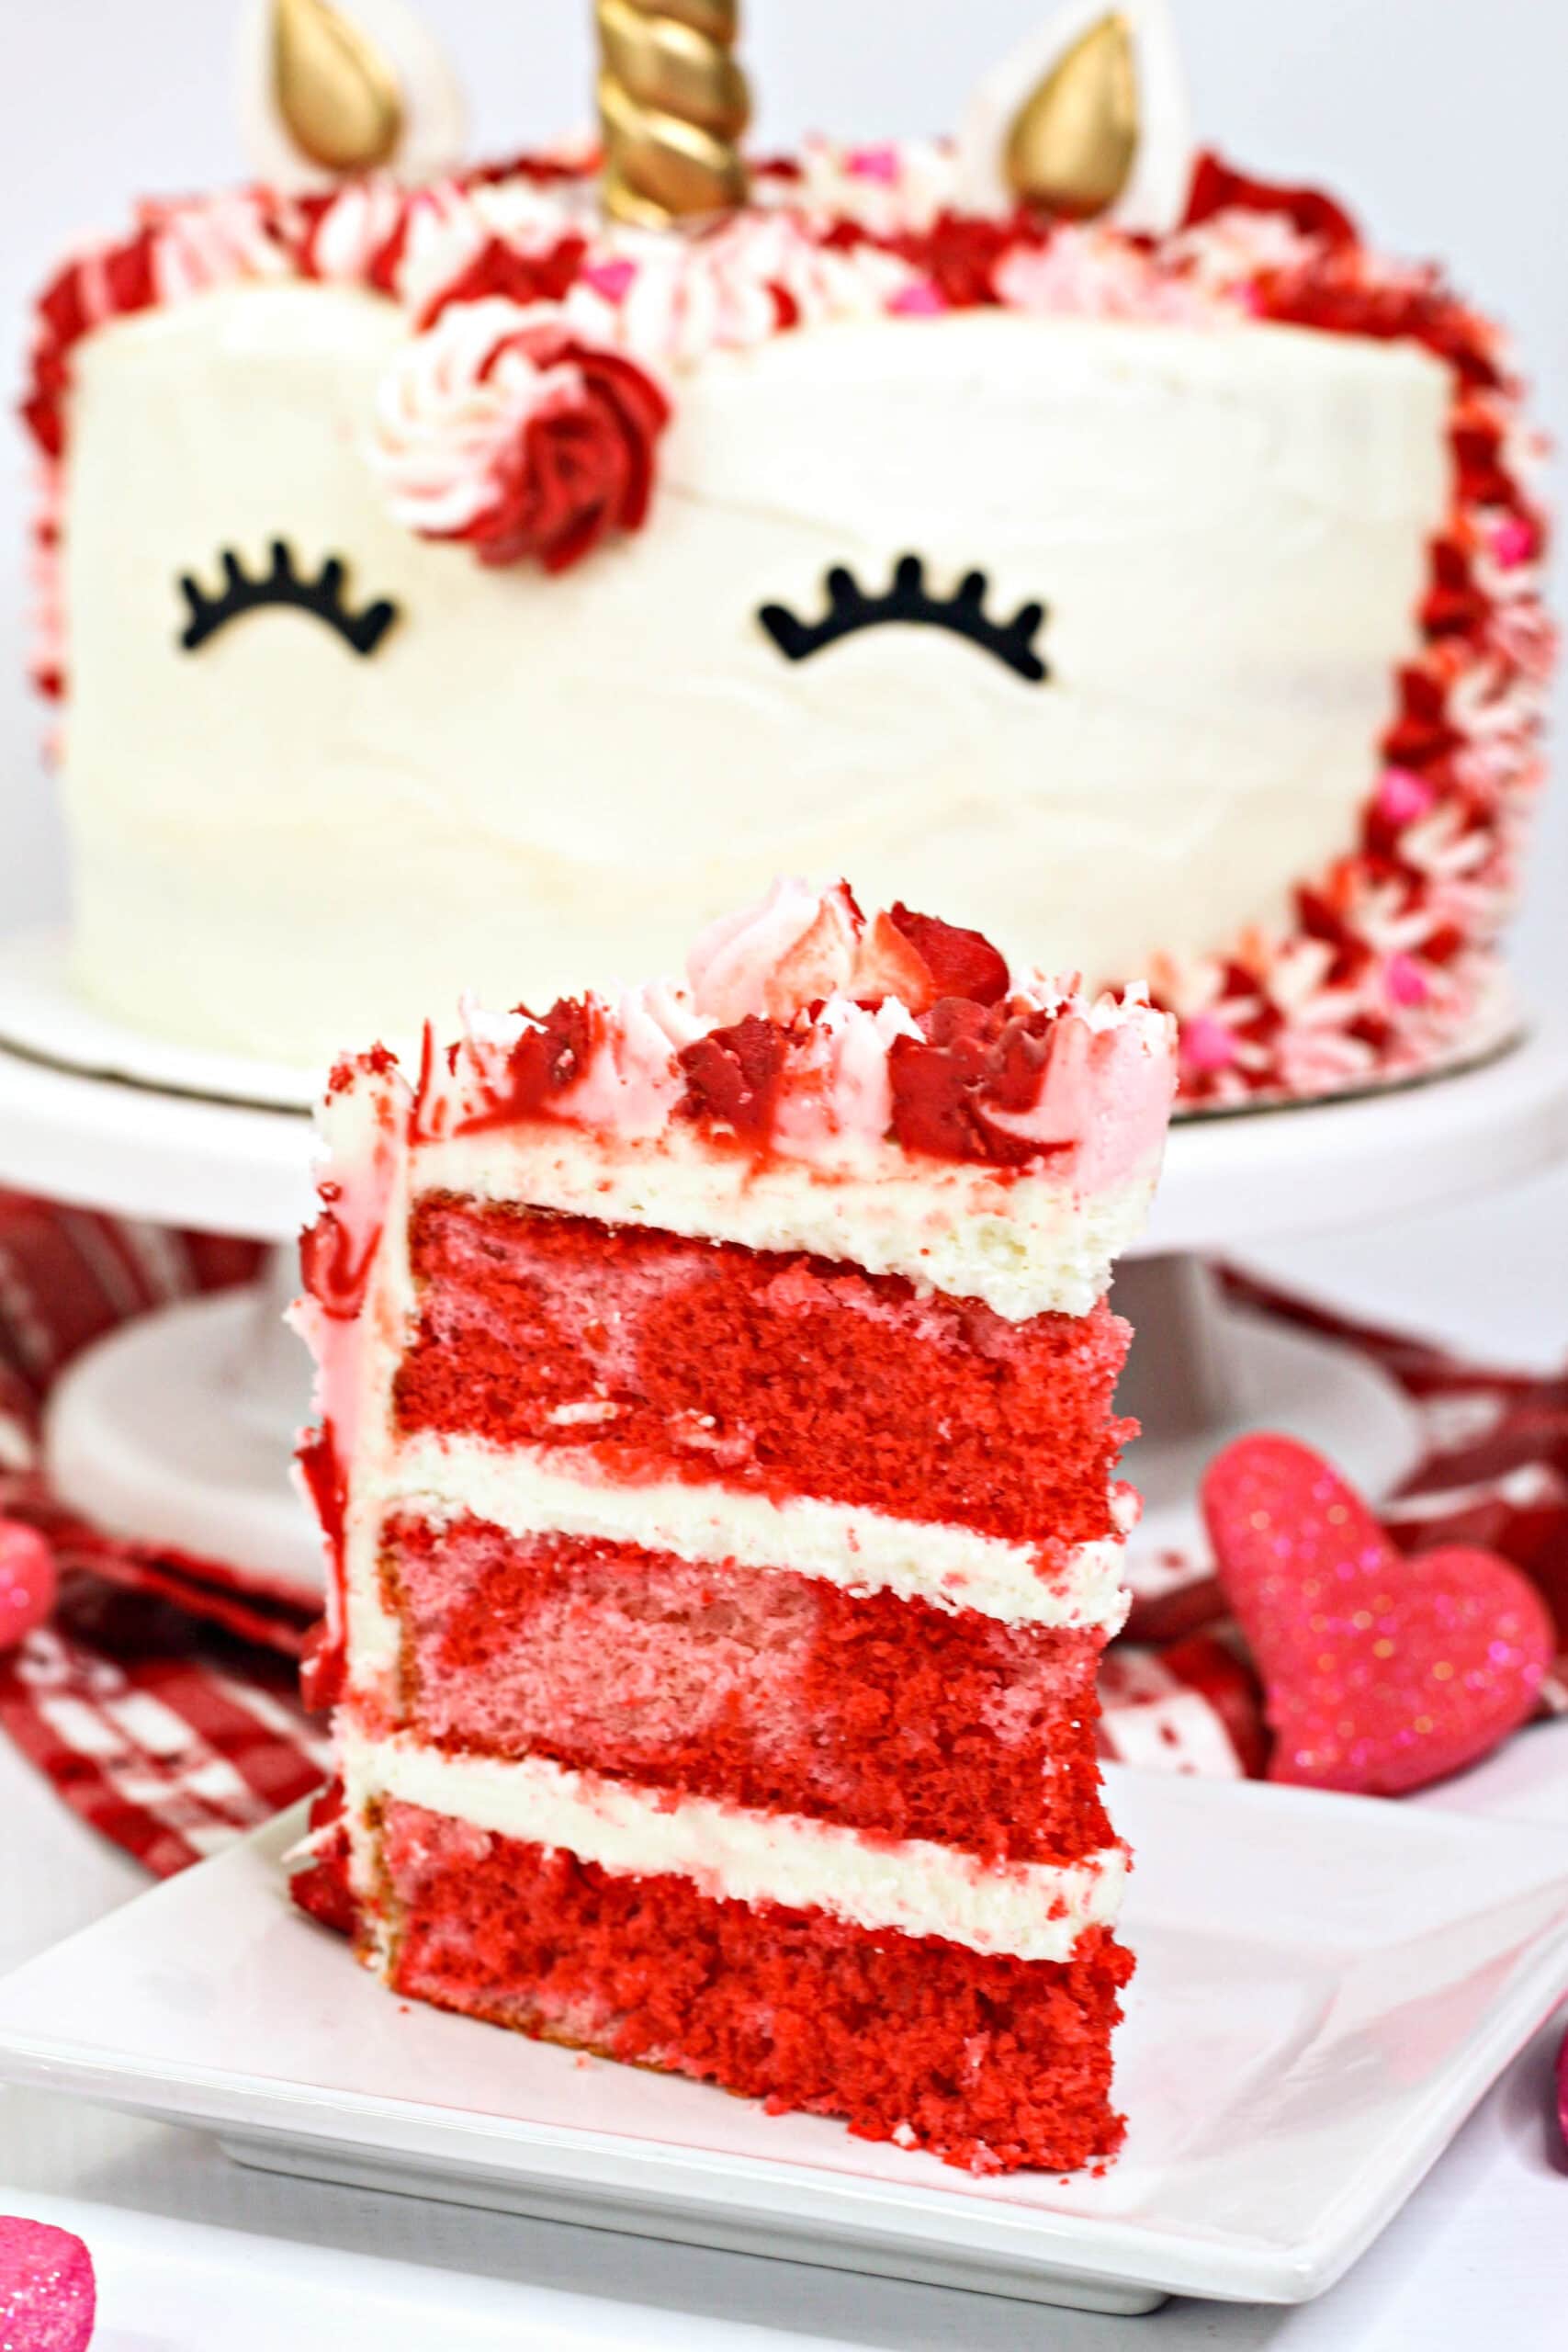 Valentine Unicorn Cake is the perfect homemade Valentine's Day treat. It is layered with pink and red vanilla cake and topped with homemade vanilla frosting.